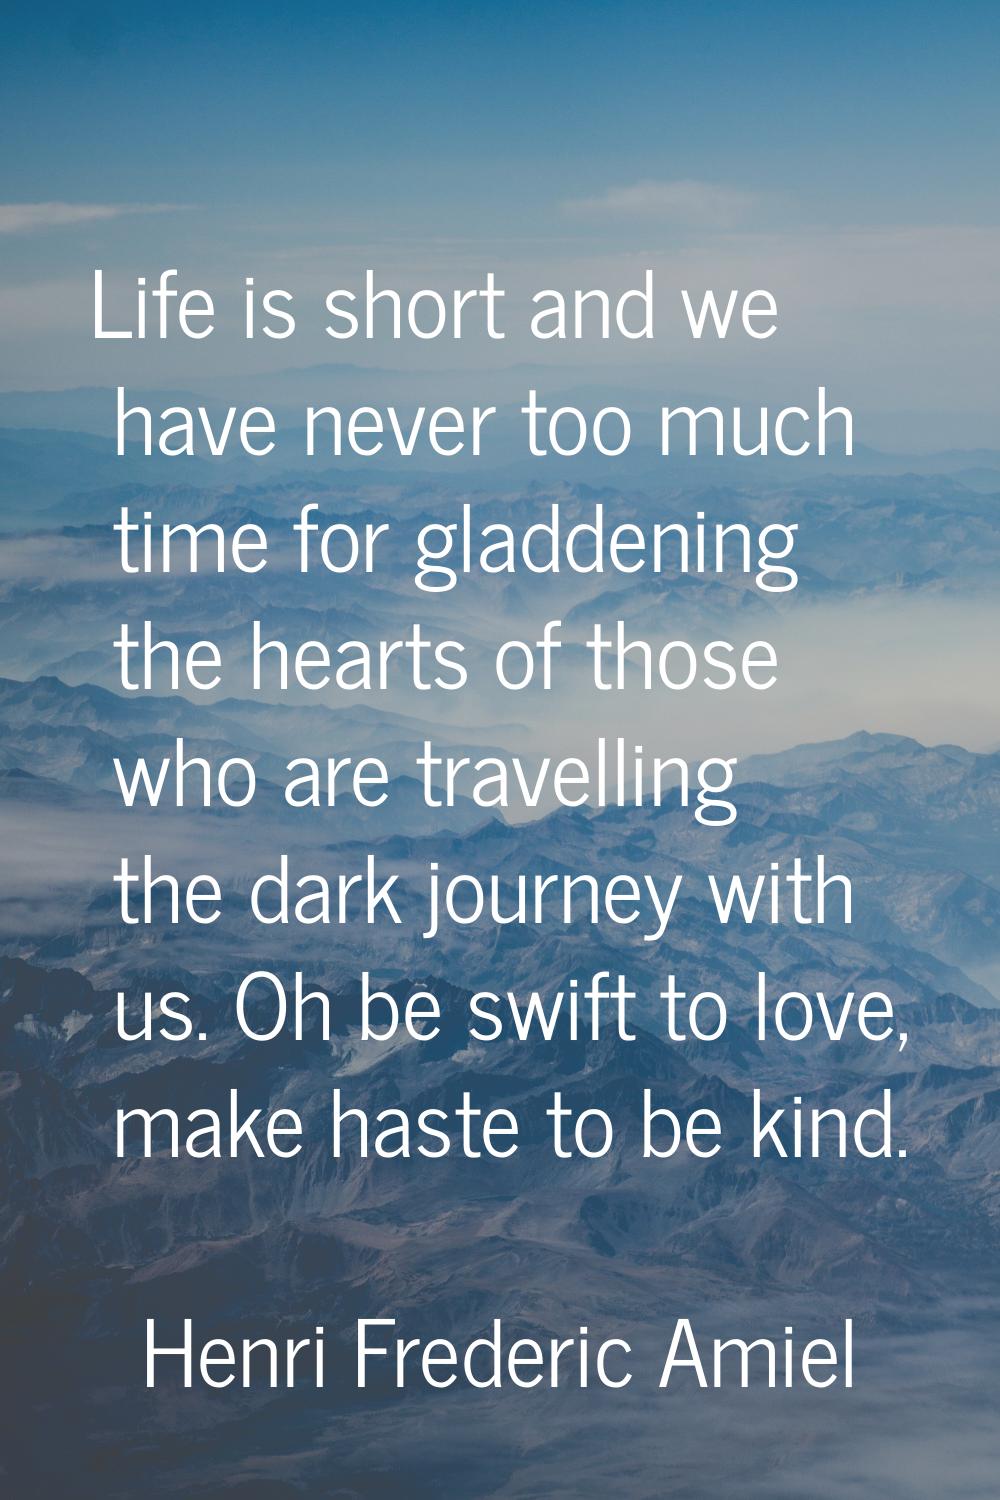 Life is short and we have never too much time for gladdening the hearts of those who are travelling